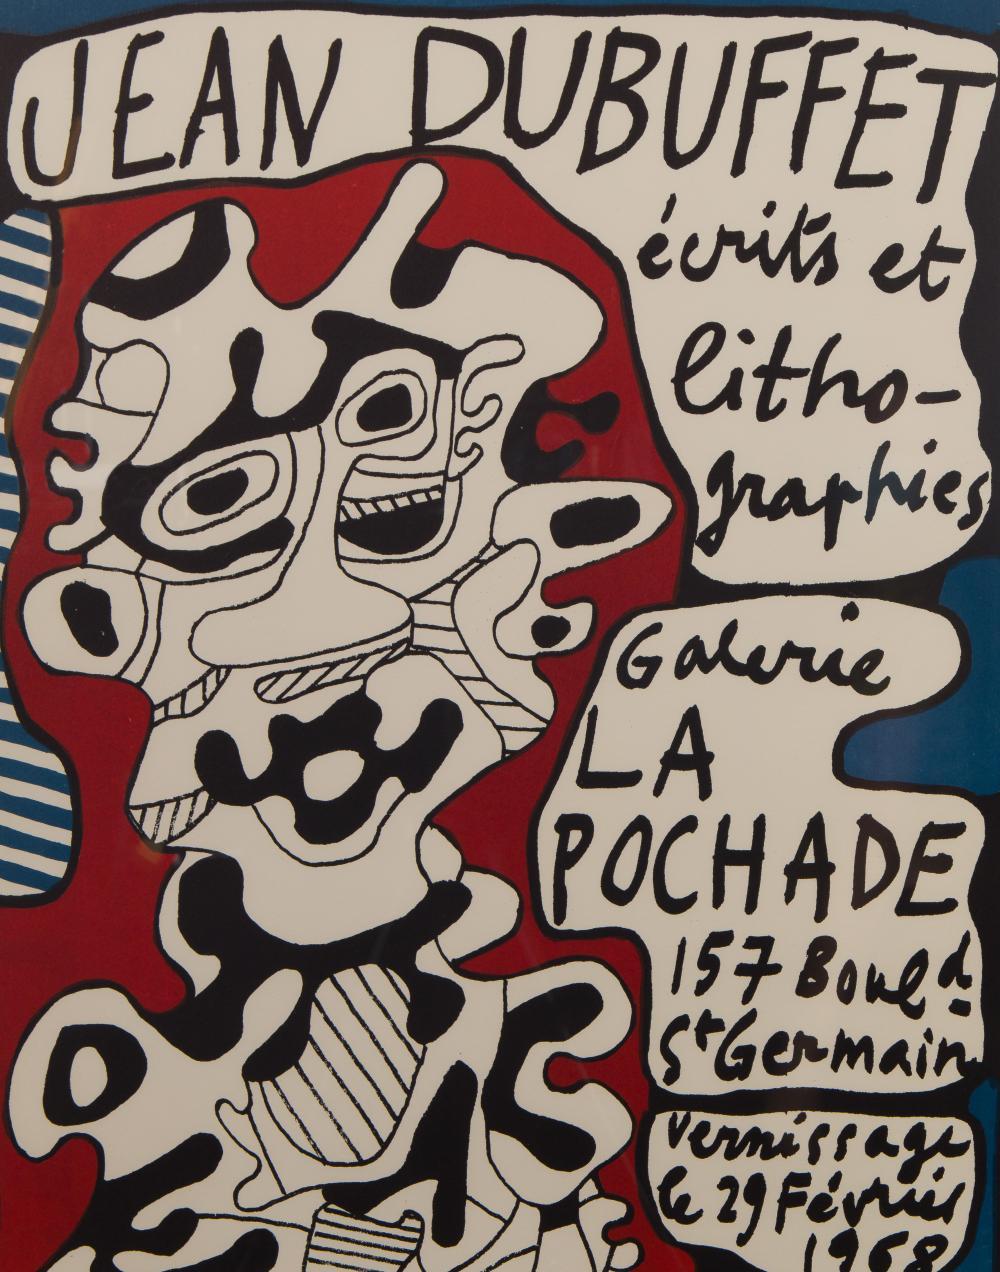 Stunning Jean Dubuffet (French, 1901-1985) 'Galerie La Pochade' Lithograph for Exhibition Poster  j1968, pencil initialed and dated 'J. D. 68' lower right and 'Affiche' lower left over blindstamp of Michel Casse Lithographie poster for an exhibition